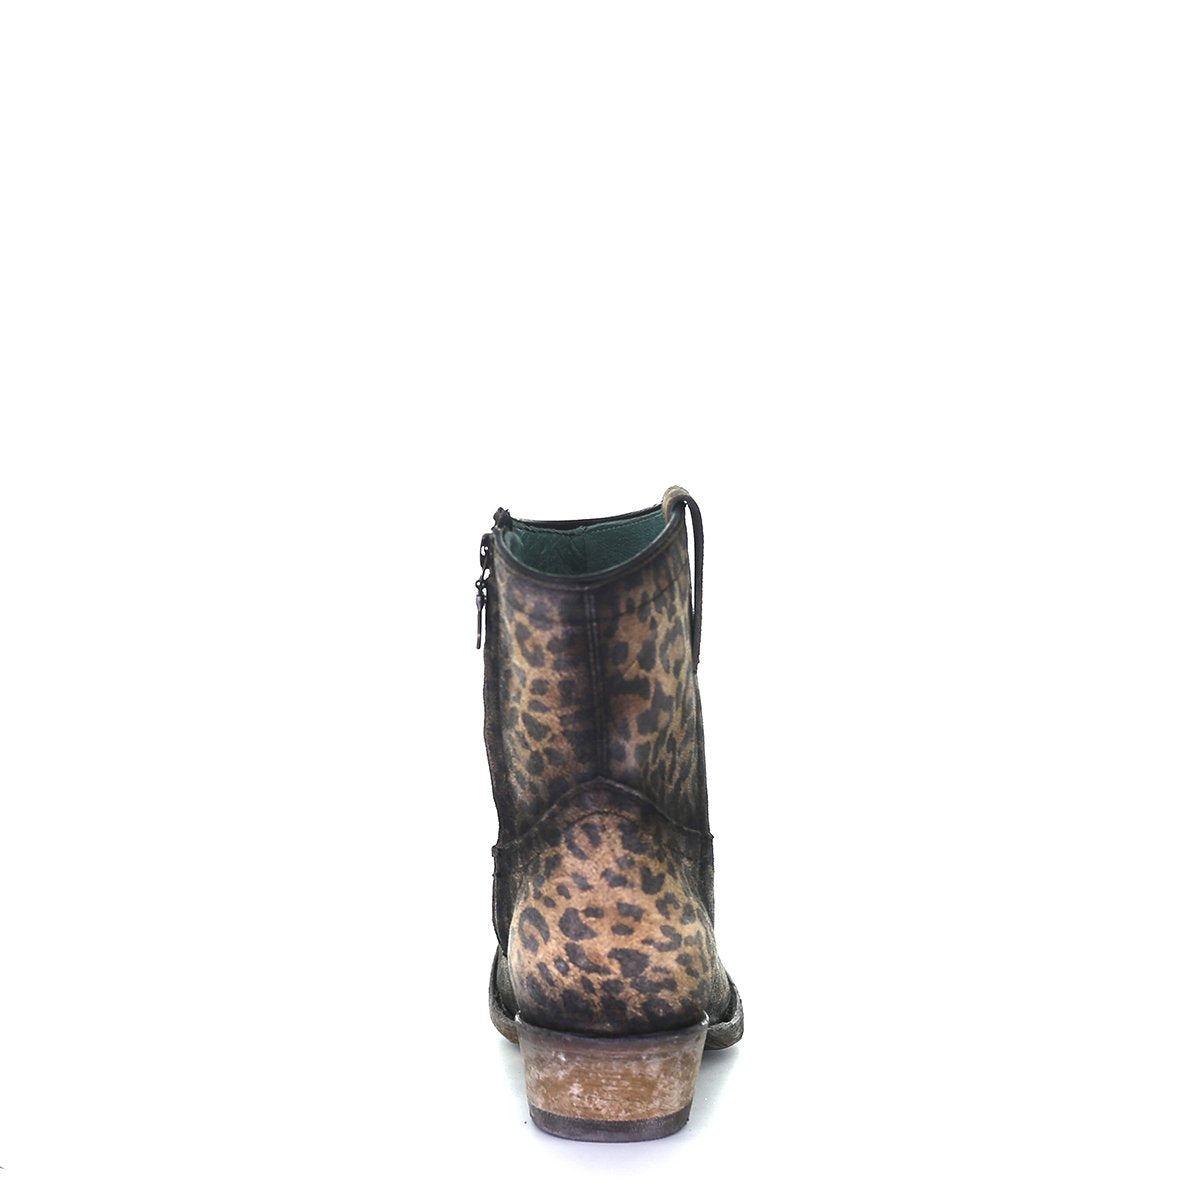 Corral Women's Leopard Ankle Boot